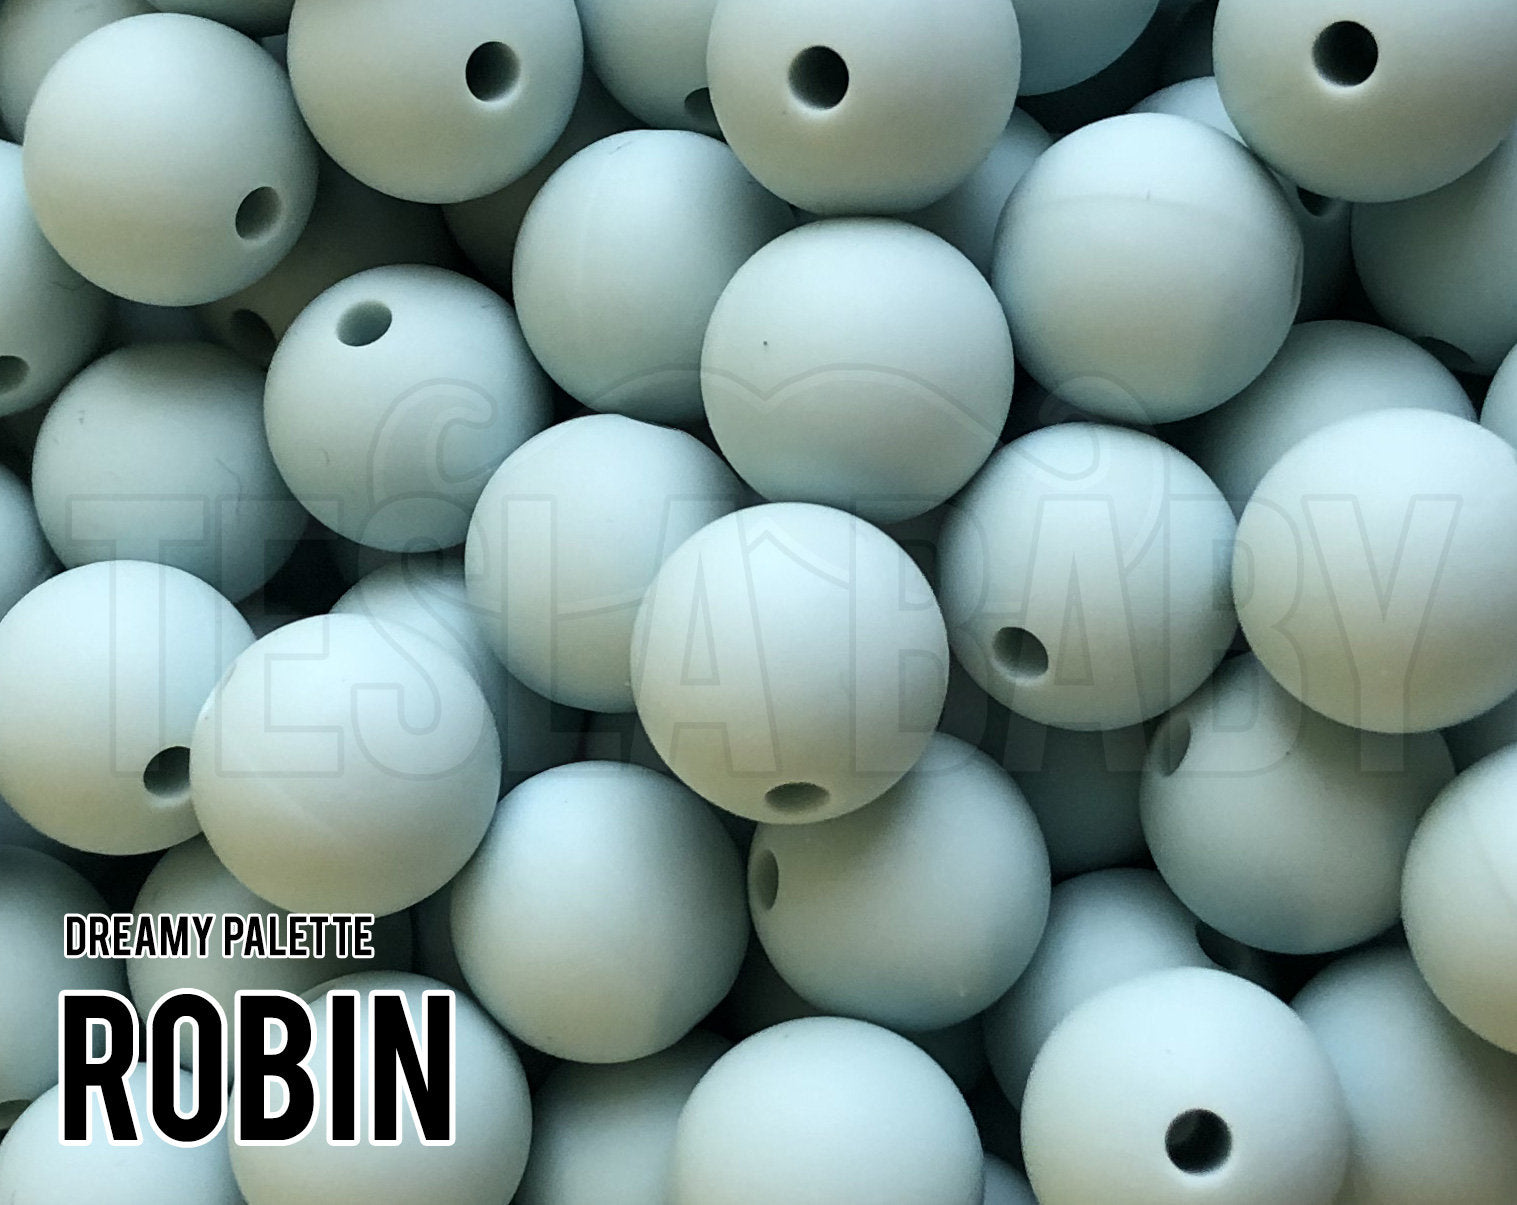 Silicone Beads, 12 mm Robin Silicone Beads - Dreamy Palette - 5-1,000 (aka light teal blue, pastel blue, blueish white) Bulk Wholesale